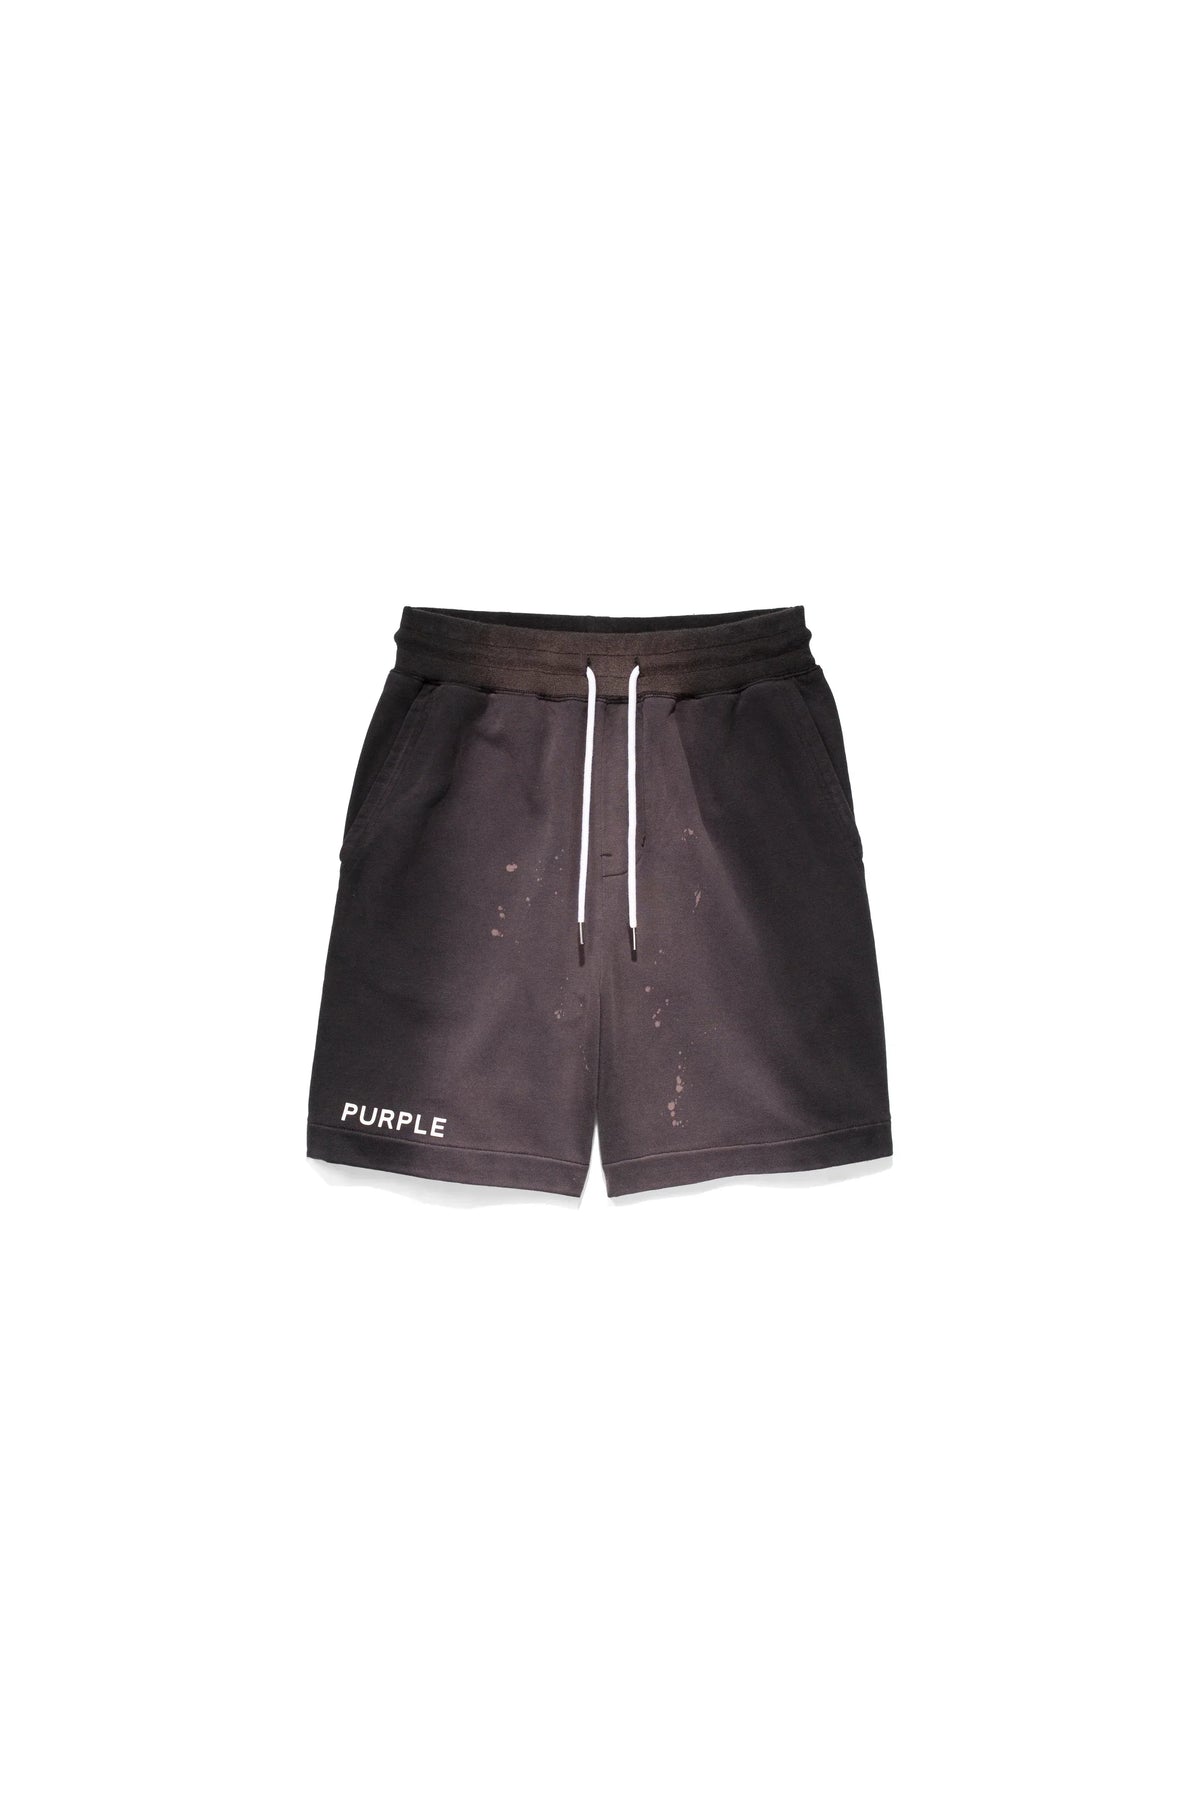 PURPLE BRAND P451 FRENCH TERRY SHORT CORE BLEACHED BLACK - Gravity NYC